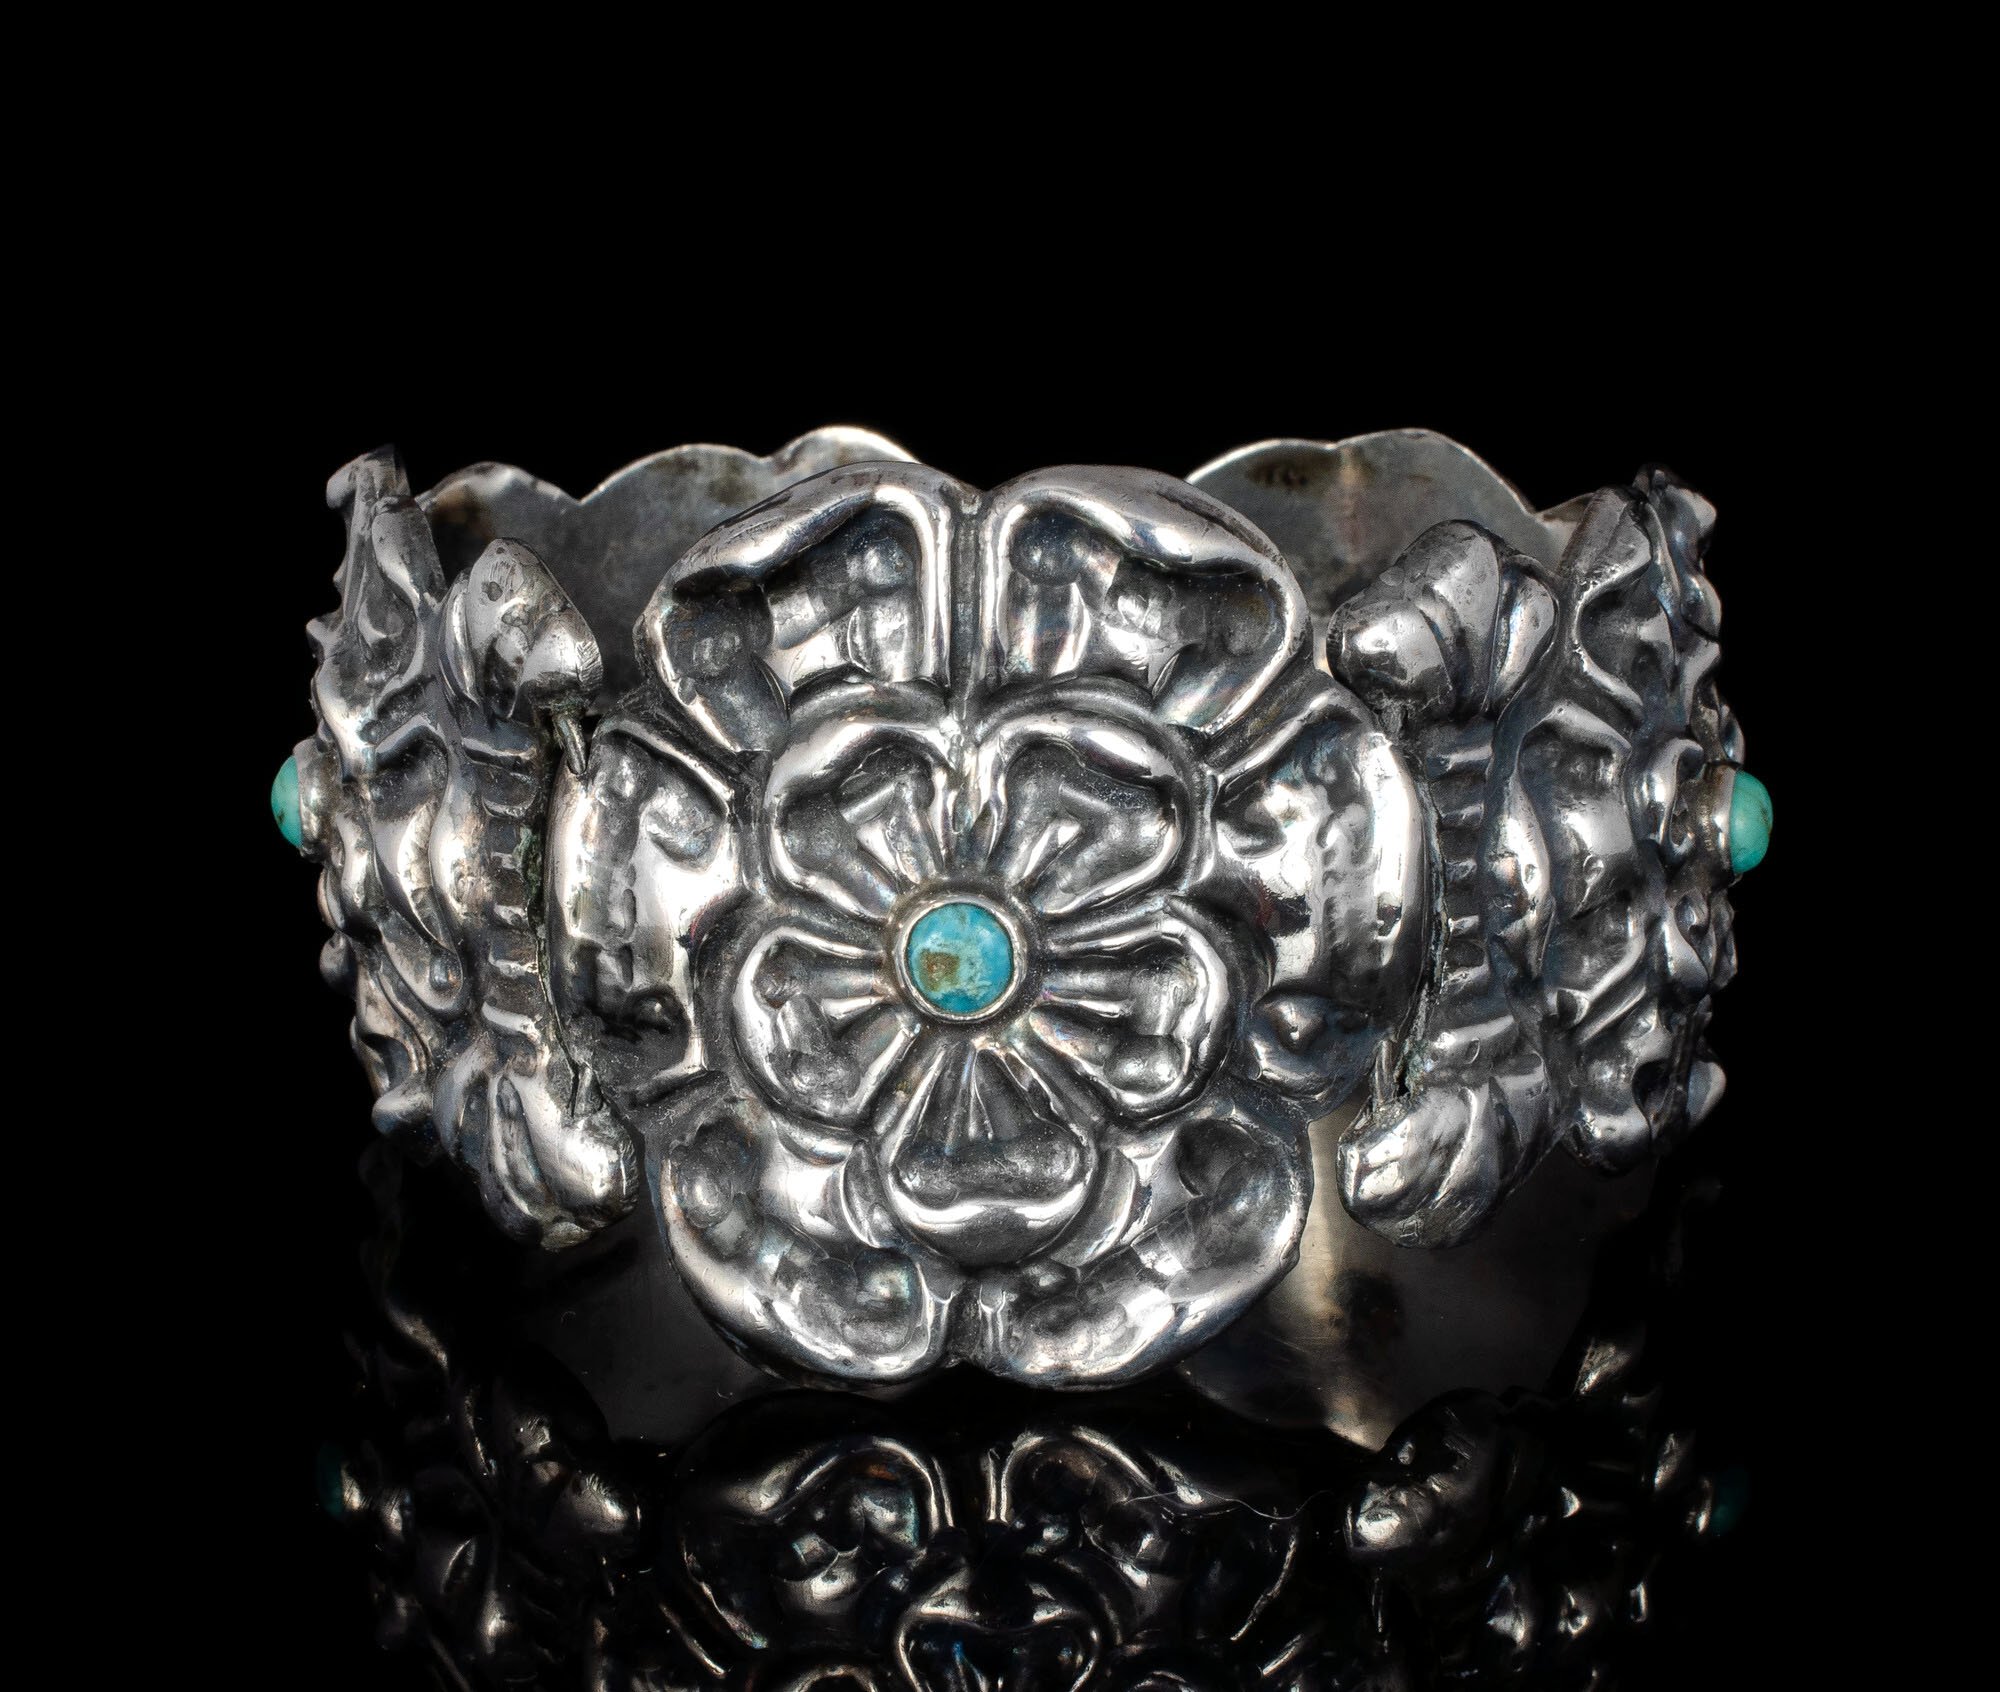 Mexico City repousse silver and turquoise "peyote flower" Bracelet